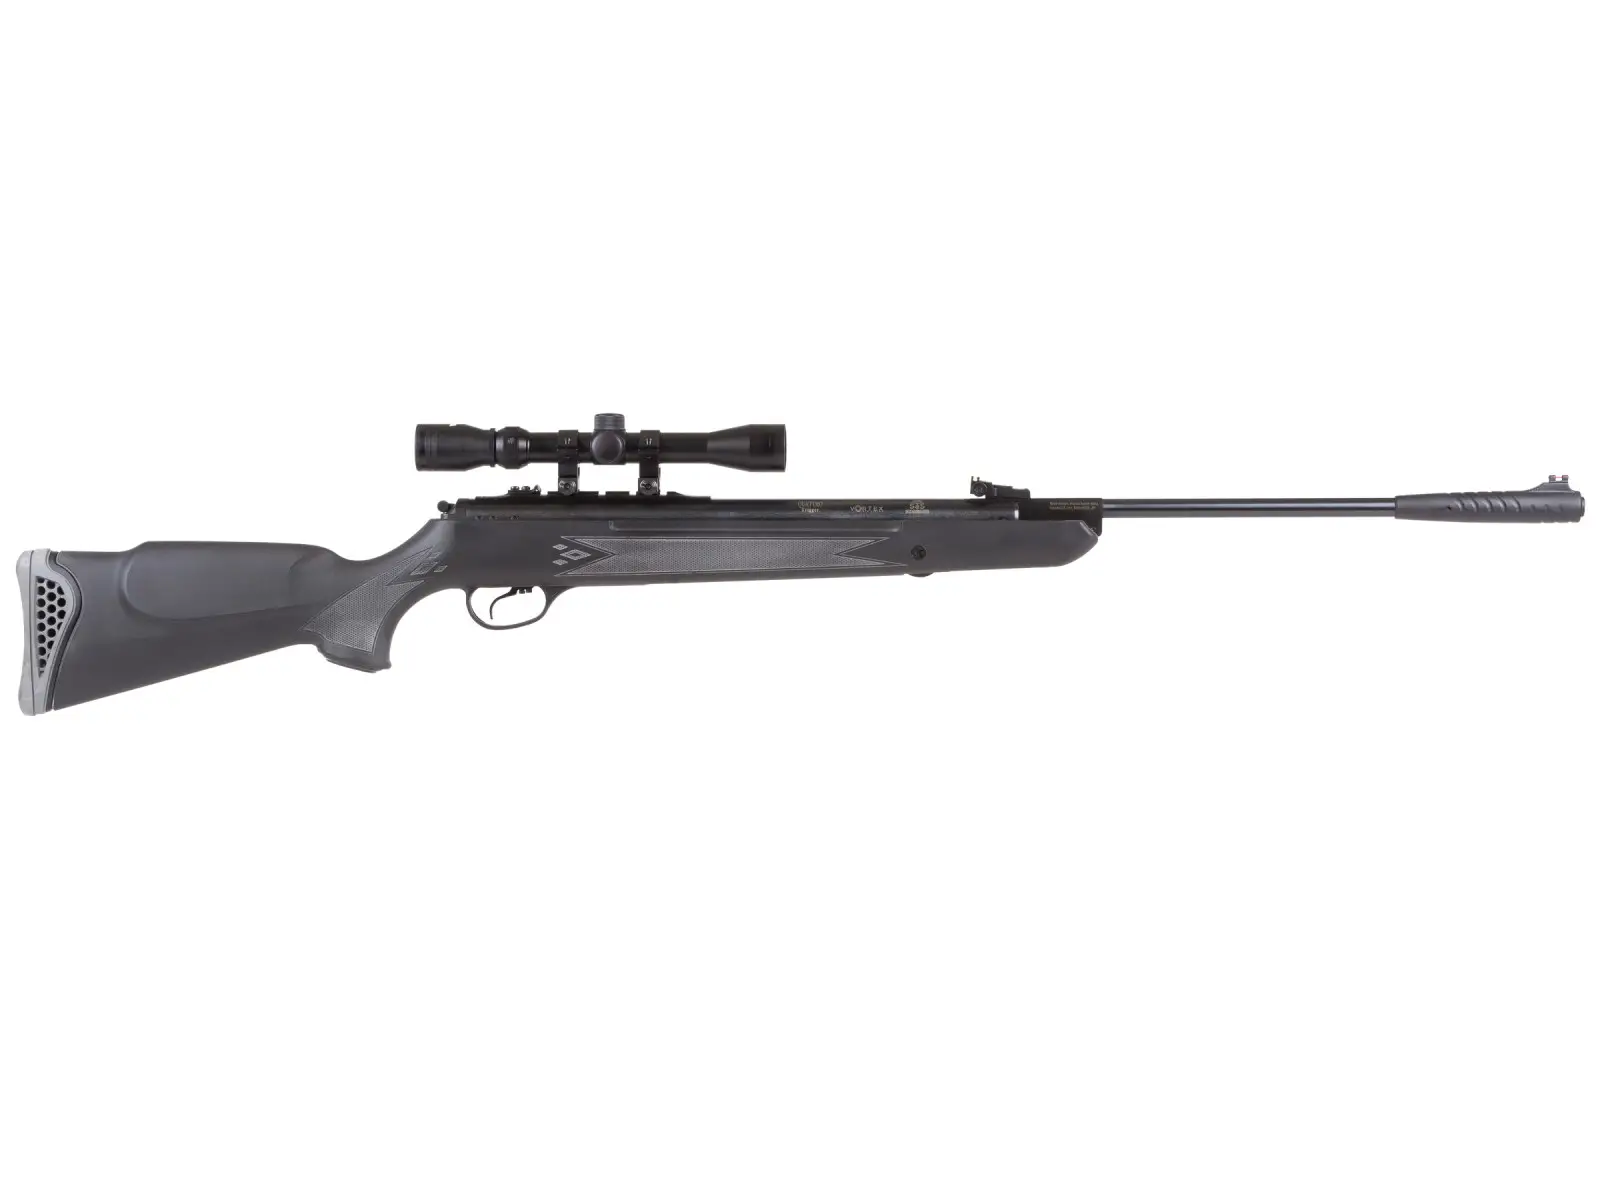 125 1 Best Air Rifles Under $300 (Reviews and Buying Guide 2022)